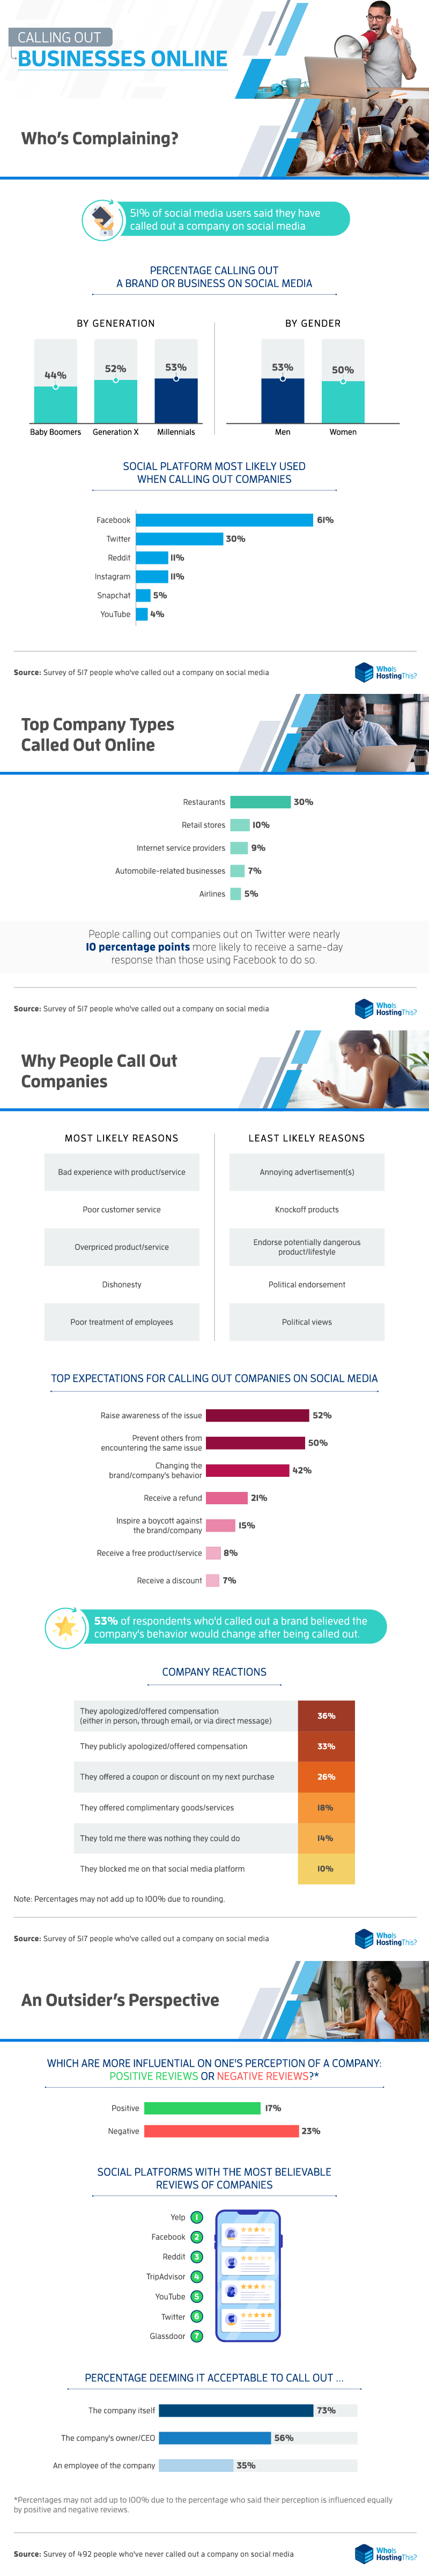 whos complaining and what are the most common reasons for calling out businesses on social infographic